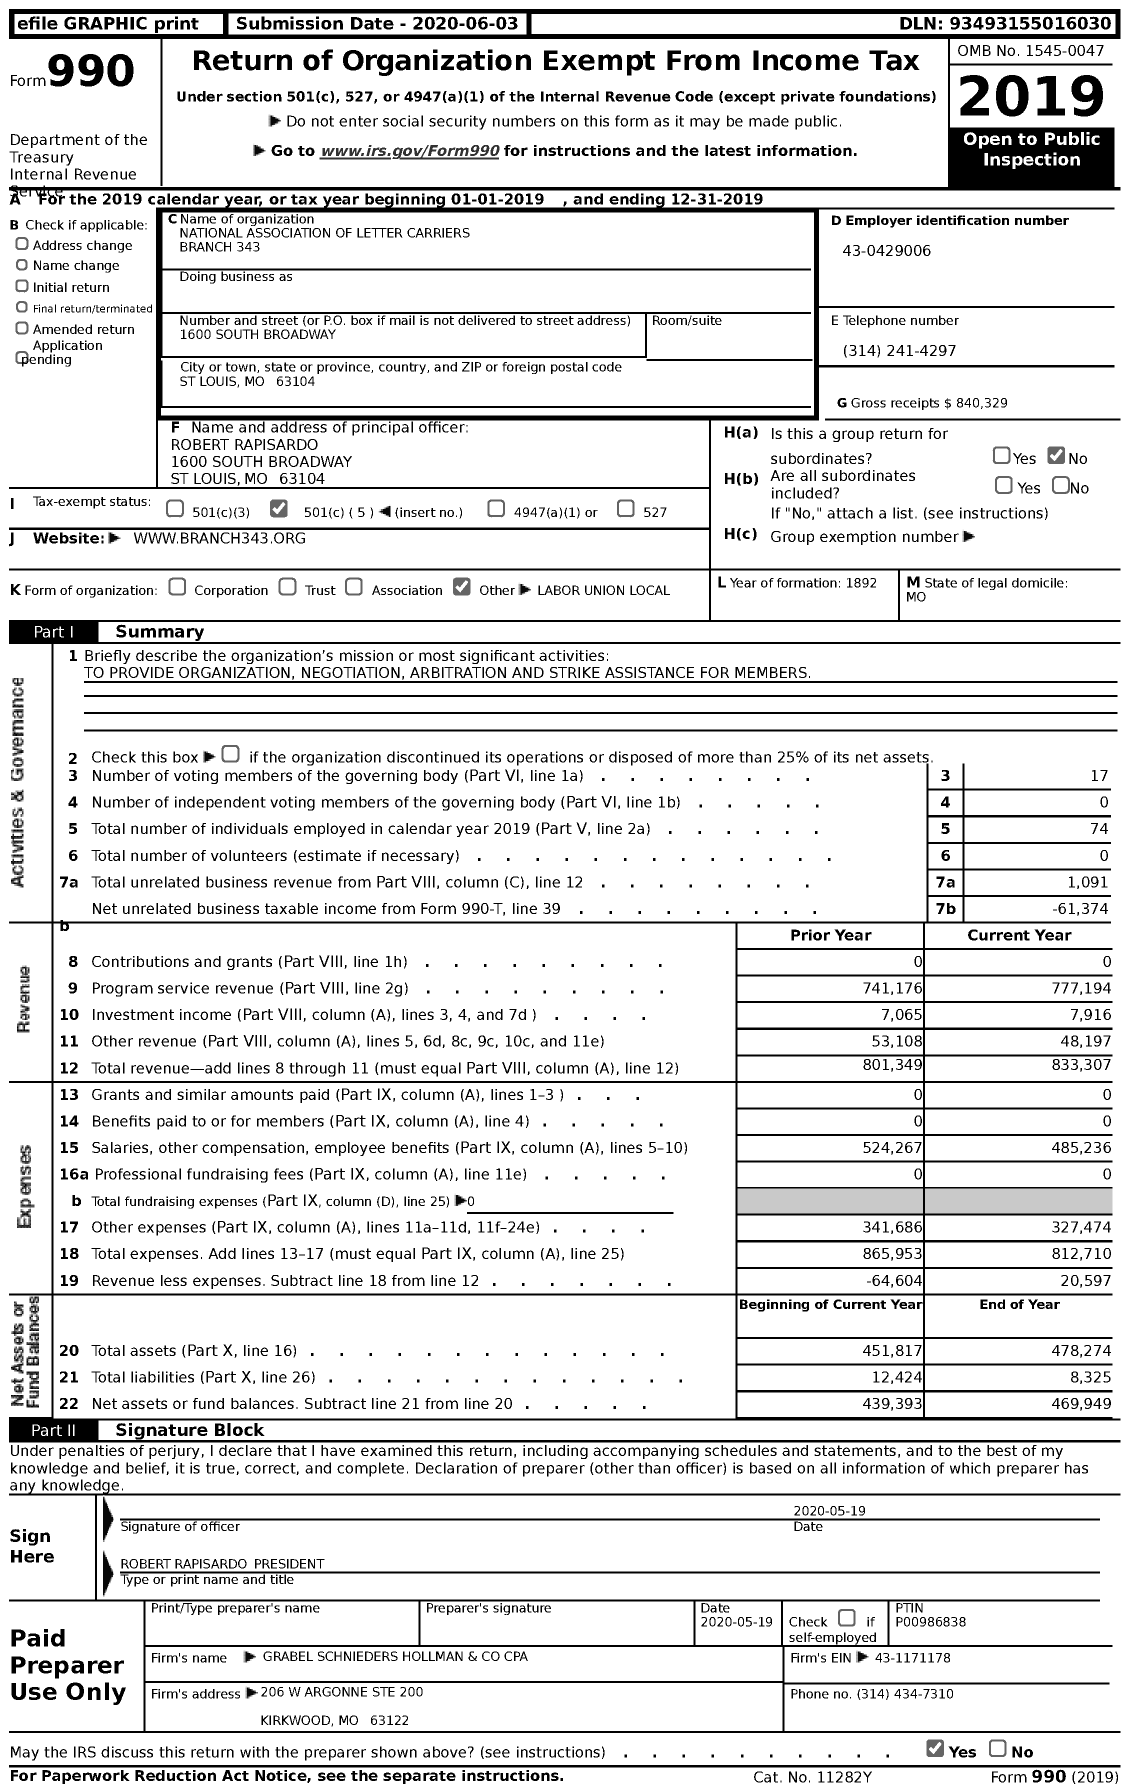 Image of first page of 2019 Form 990 for National Association of Letter Carriers Branch 343